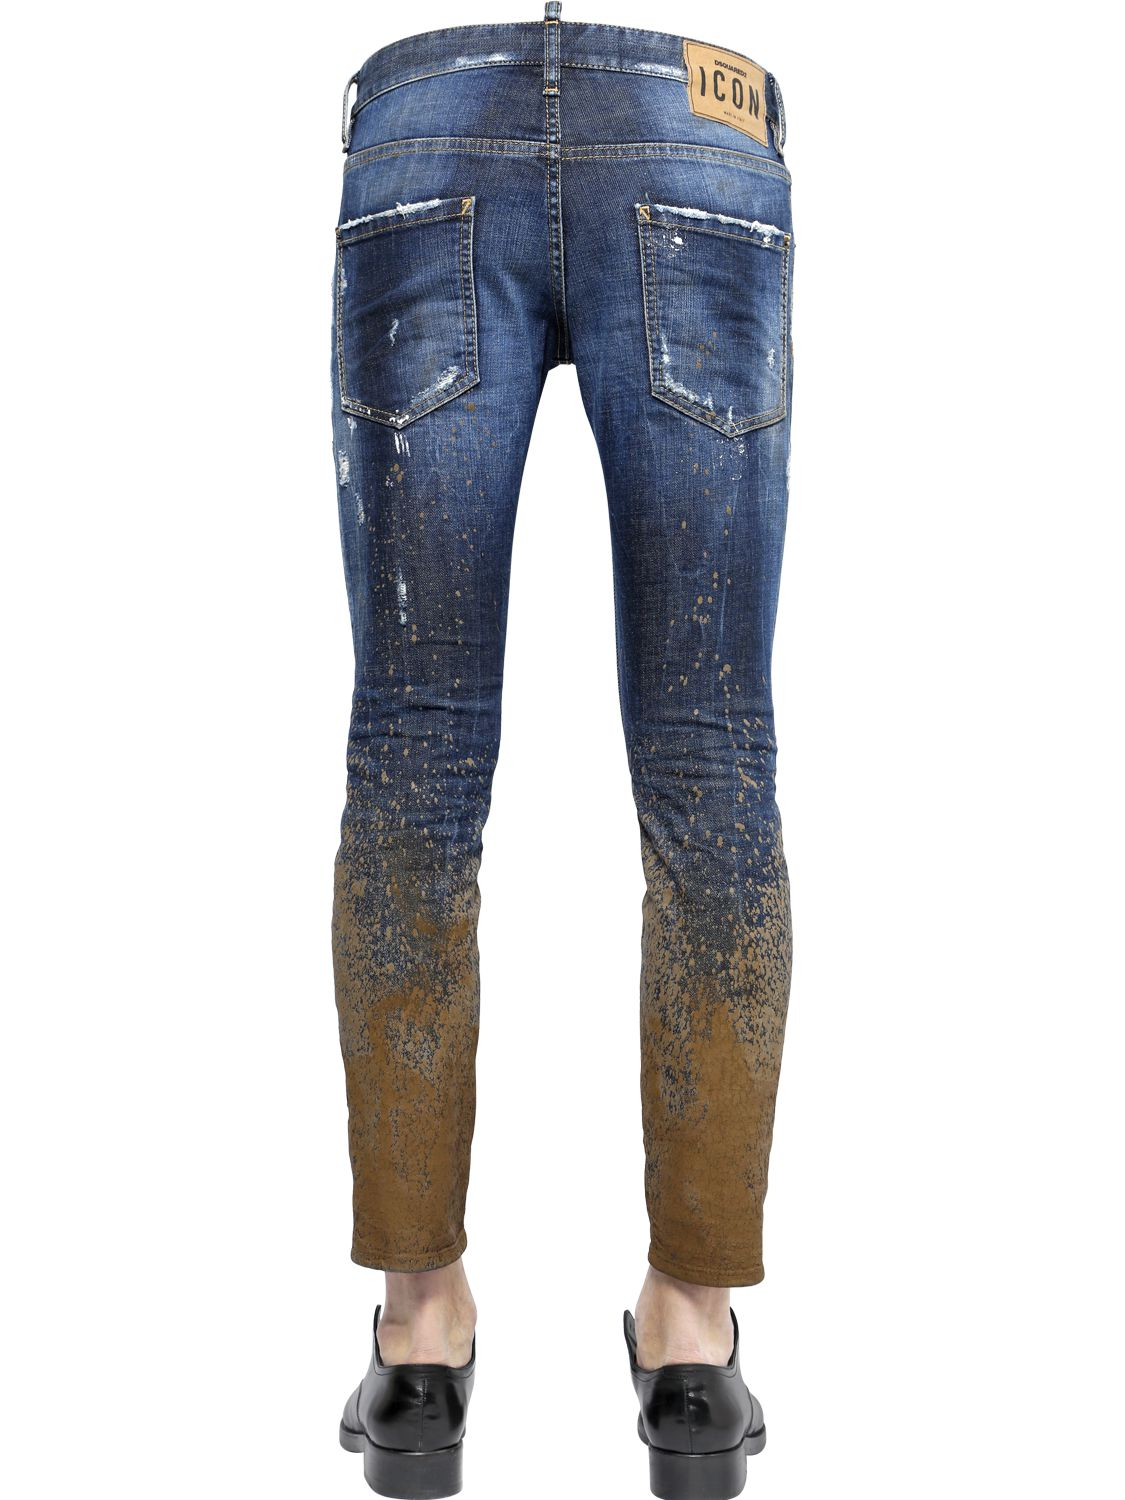 muddy jeans for sale